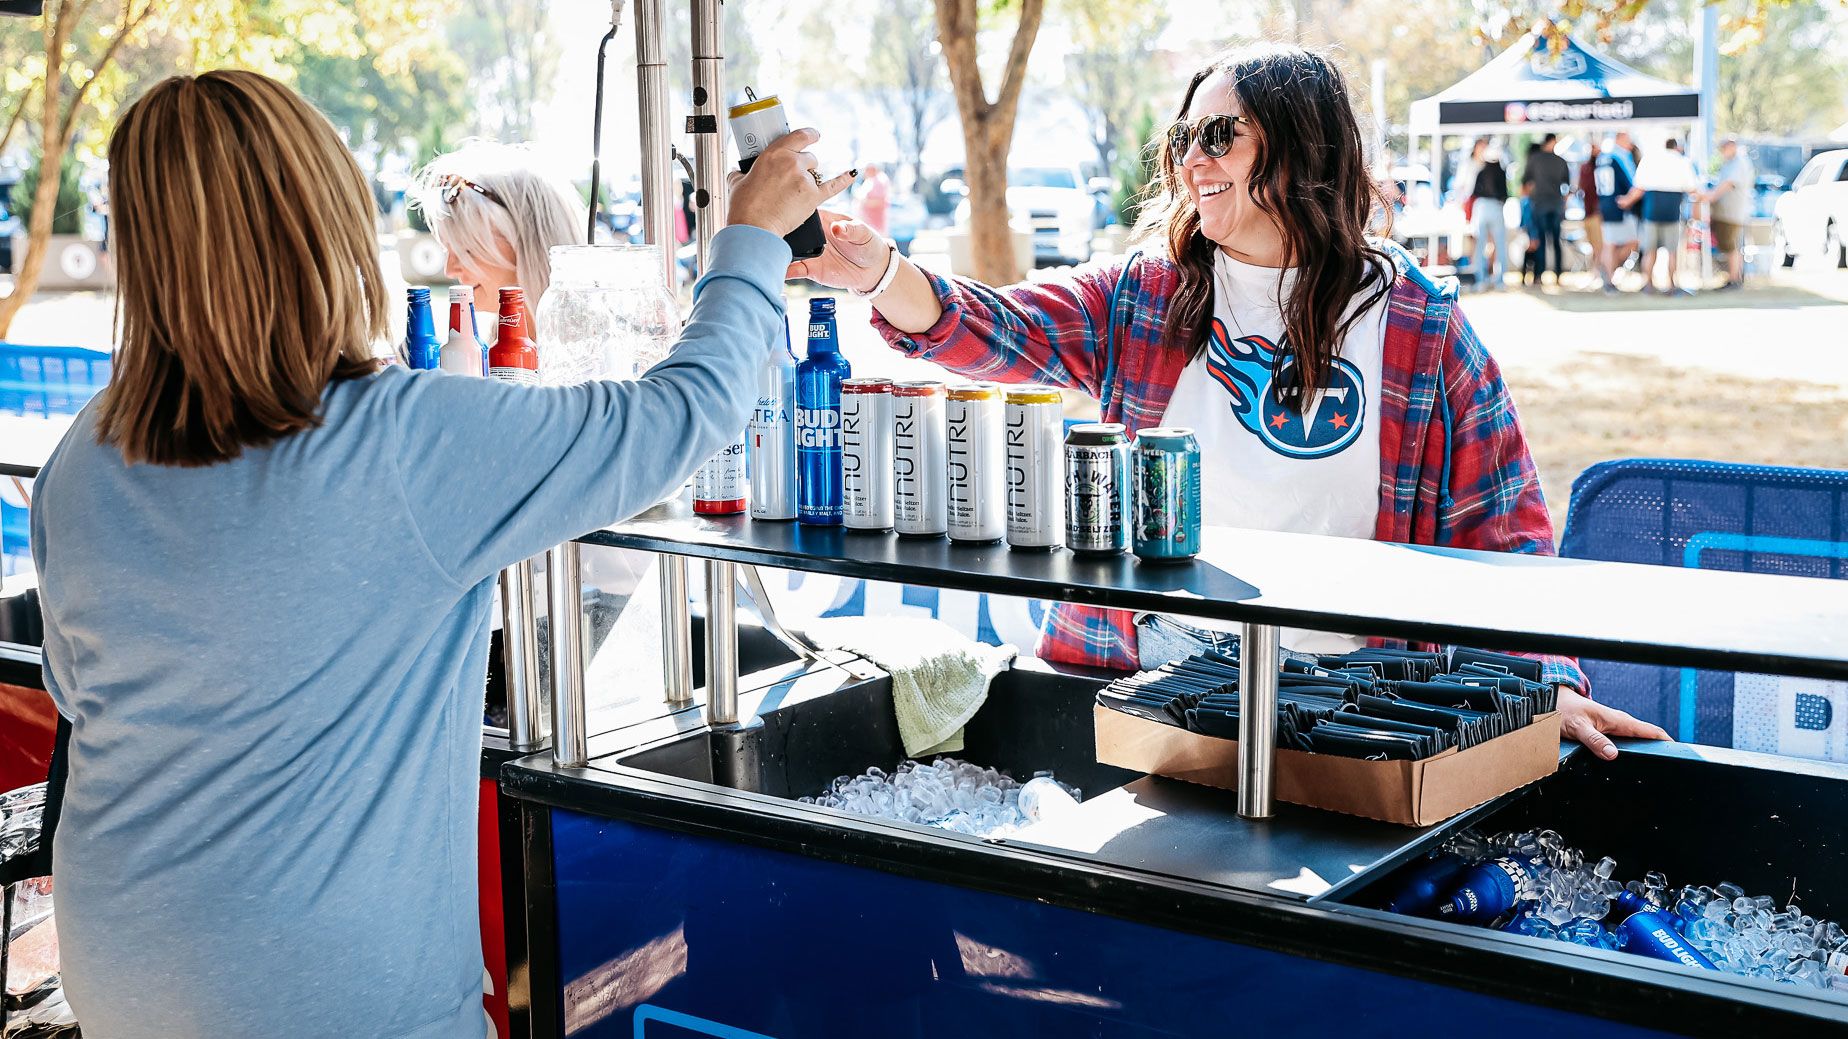 Tailgreeter - Premium Tailgates: Lions vs. Bears Game Day Party